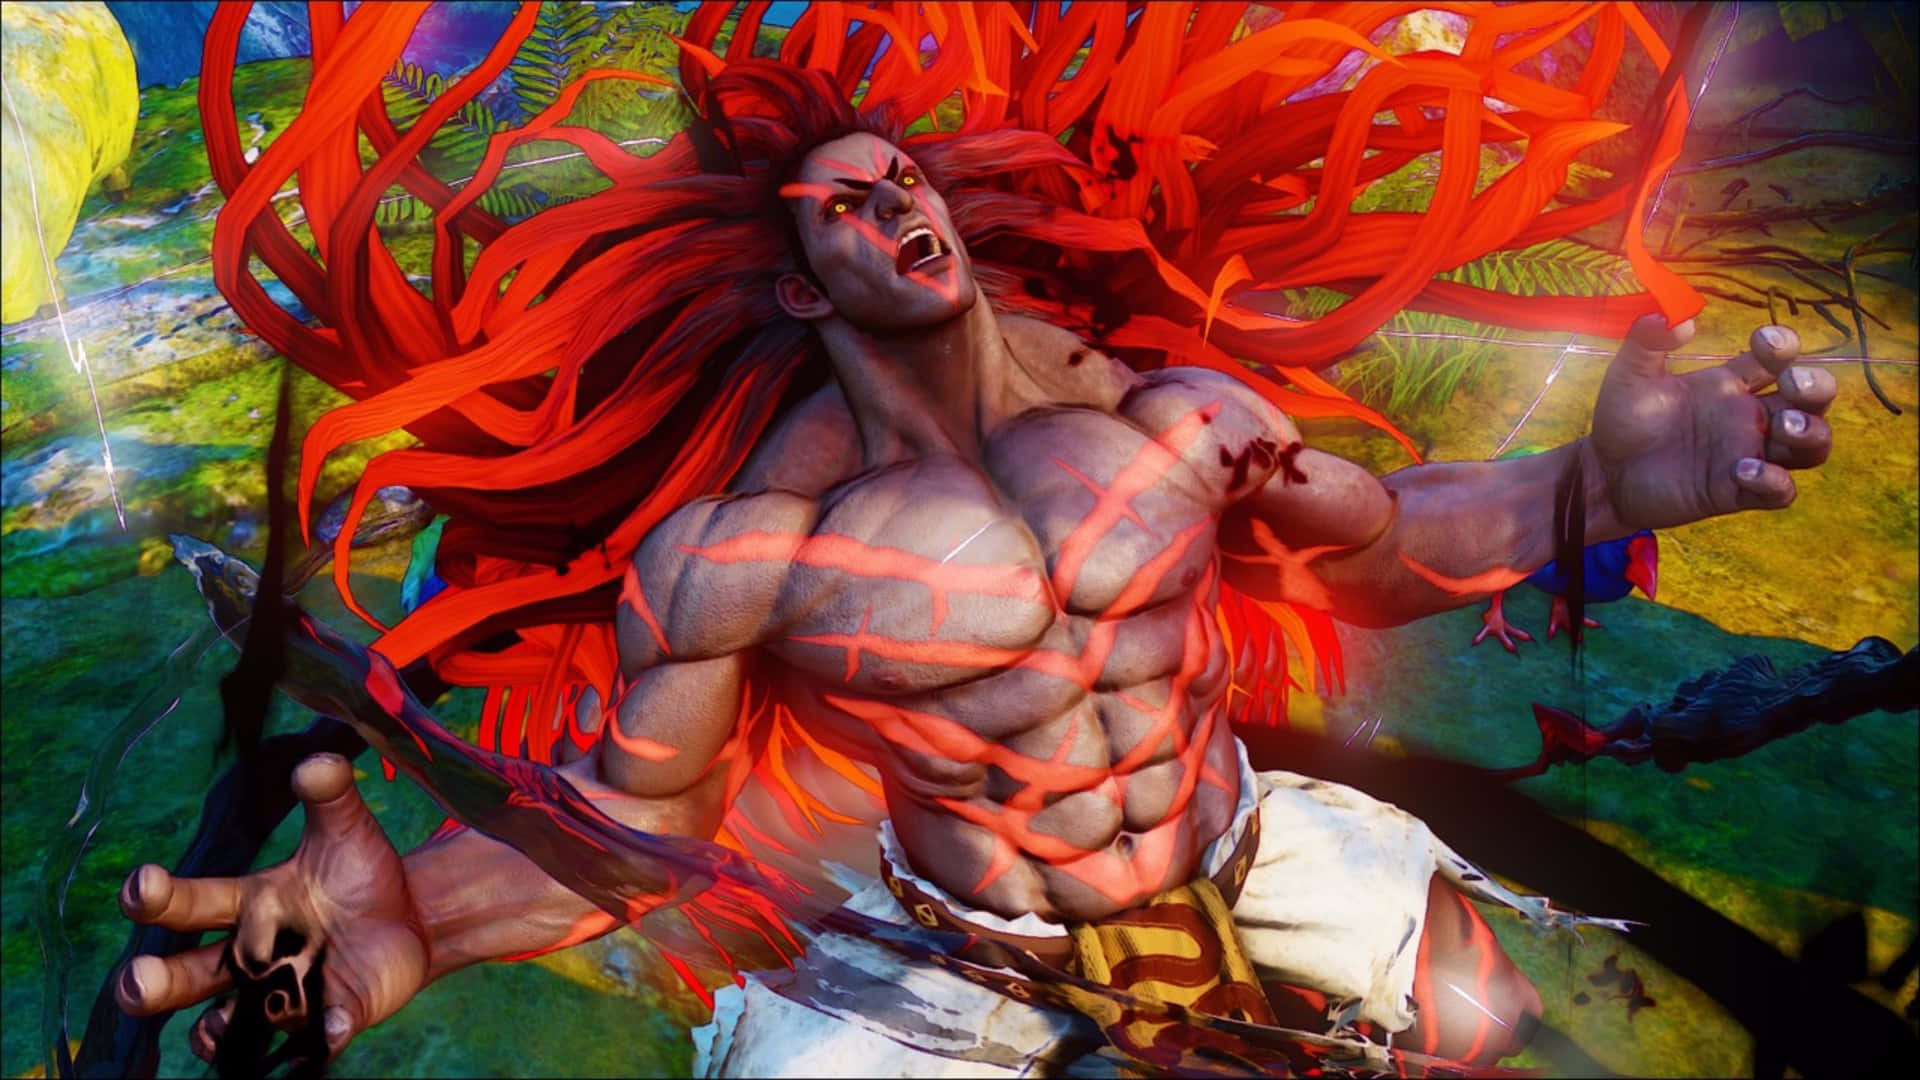 Classic Street Fighter characters in action. Wallpaper